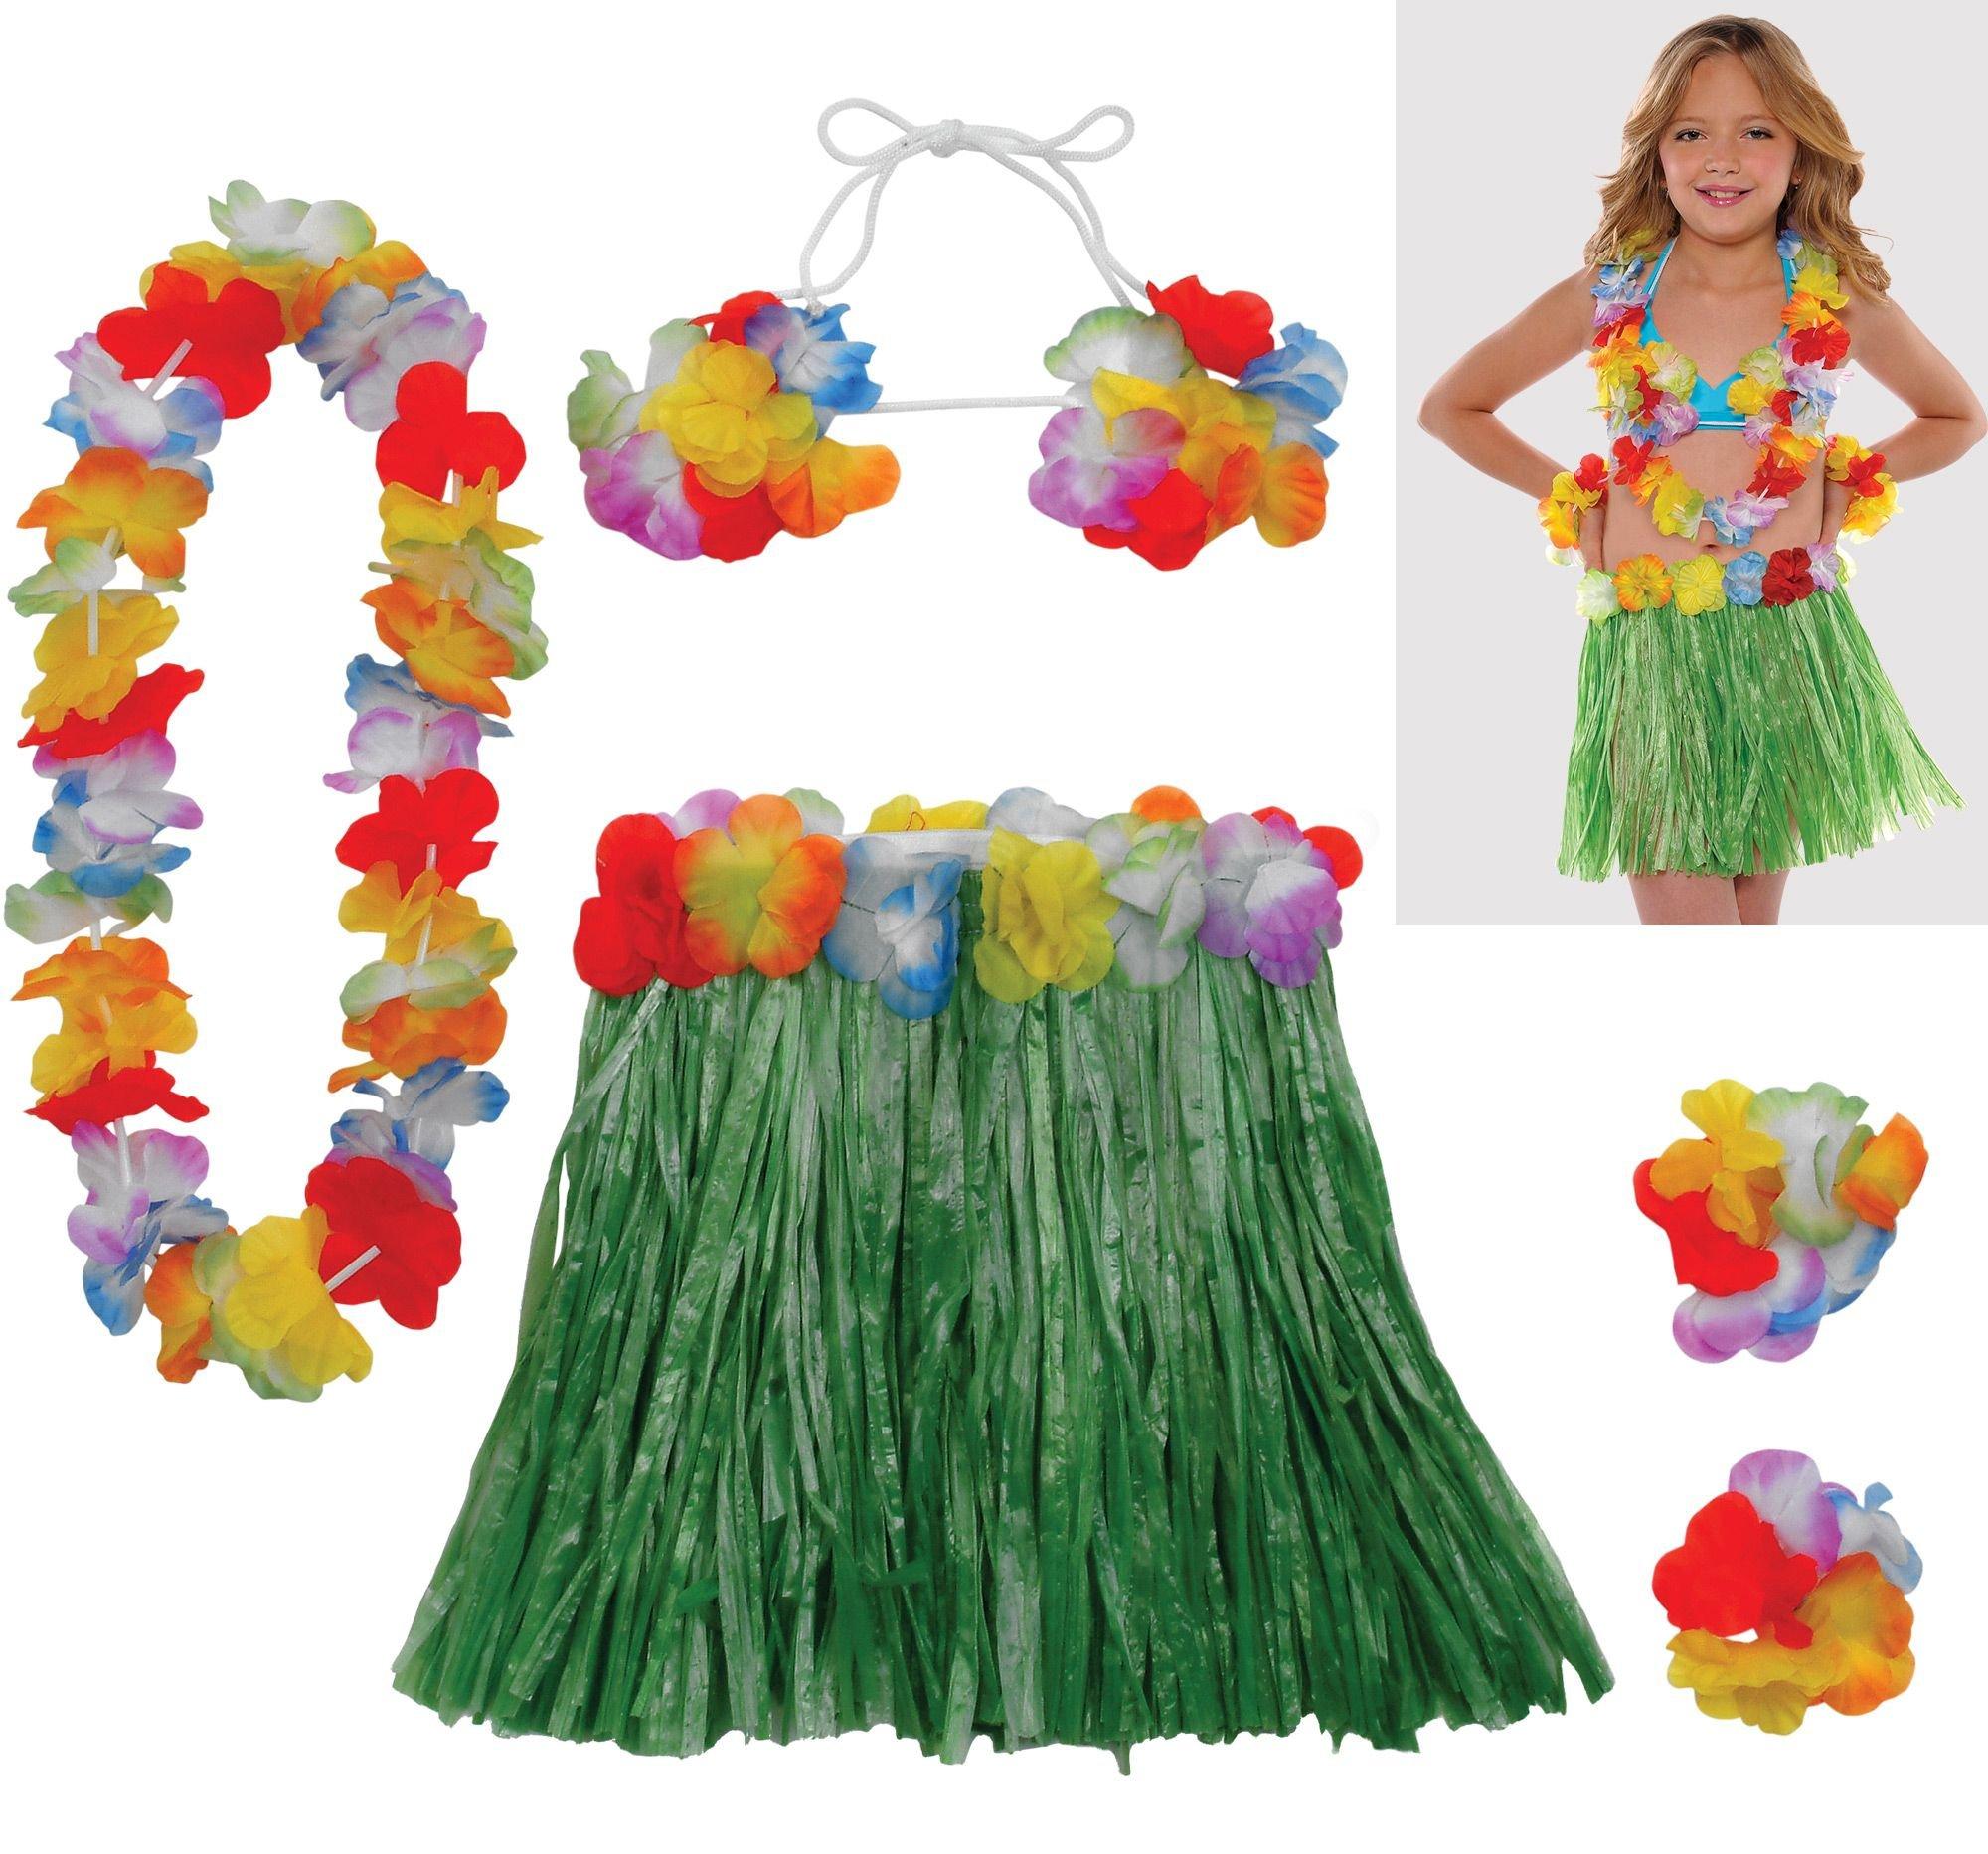 Toma 8 PCS Fancy Dress Hula Skirt Costume Hawaiian Grass Skirt Dancer Dress  Set with Sunglasses and Ring Party Skirts for Adult Kids 